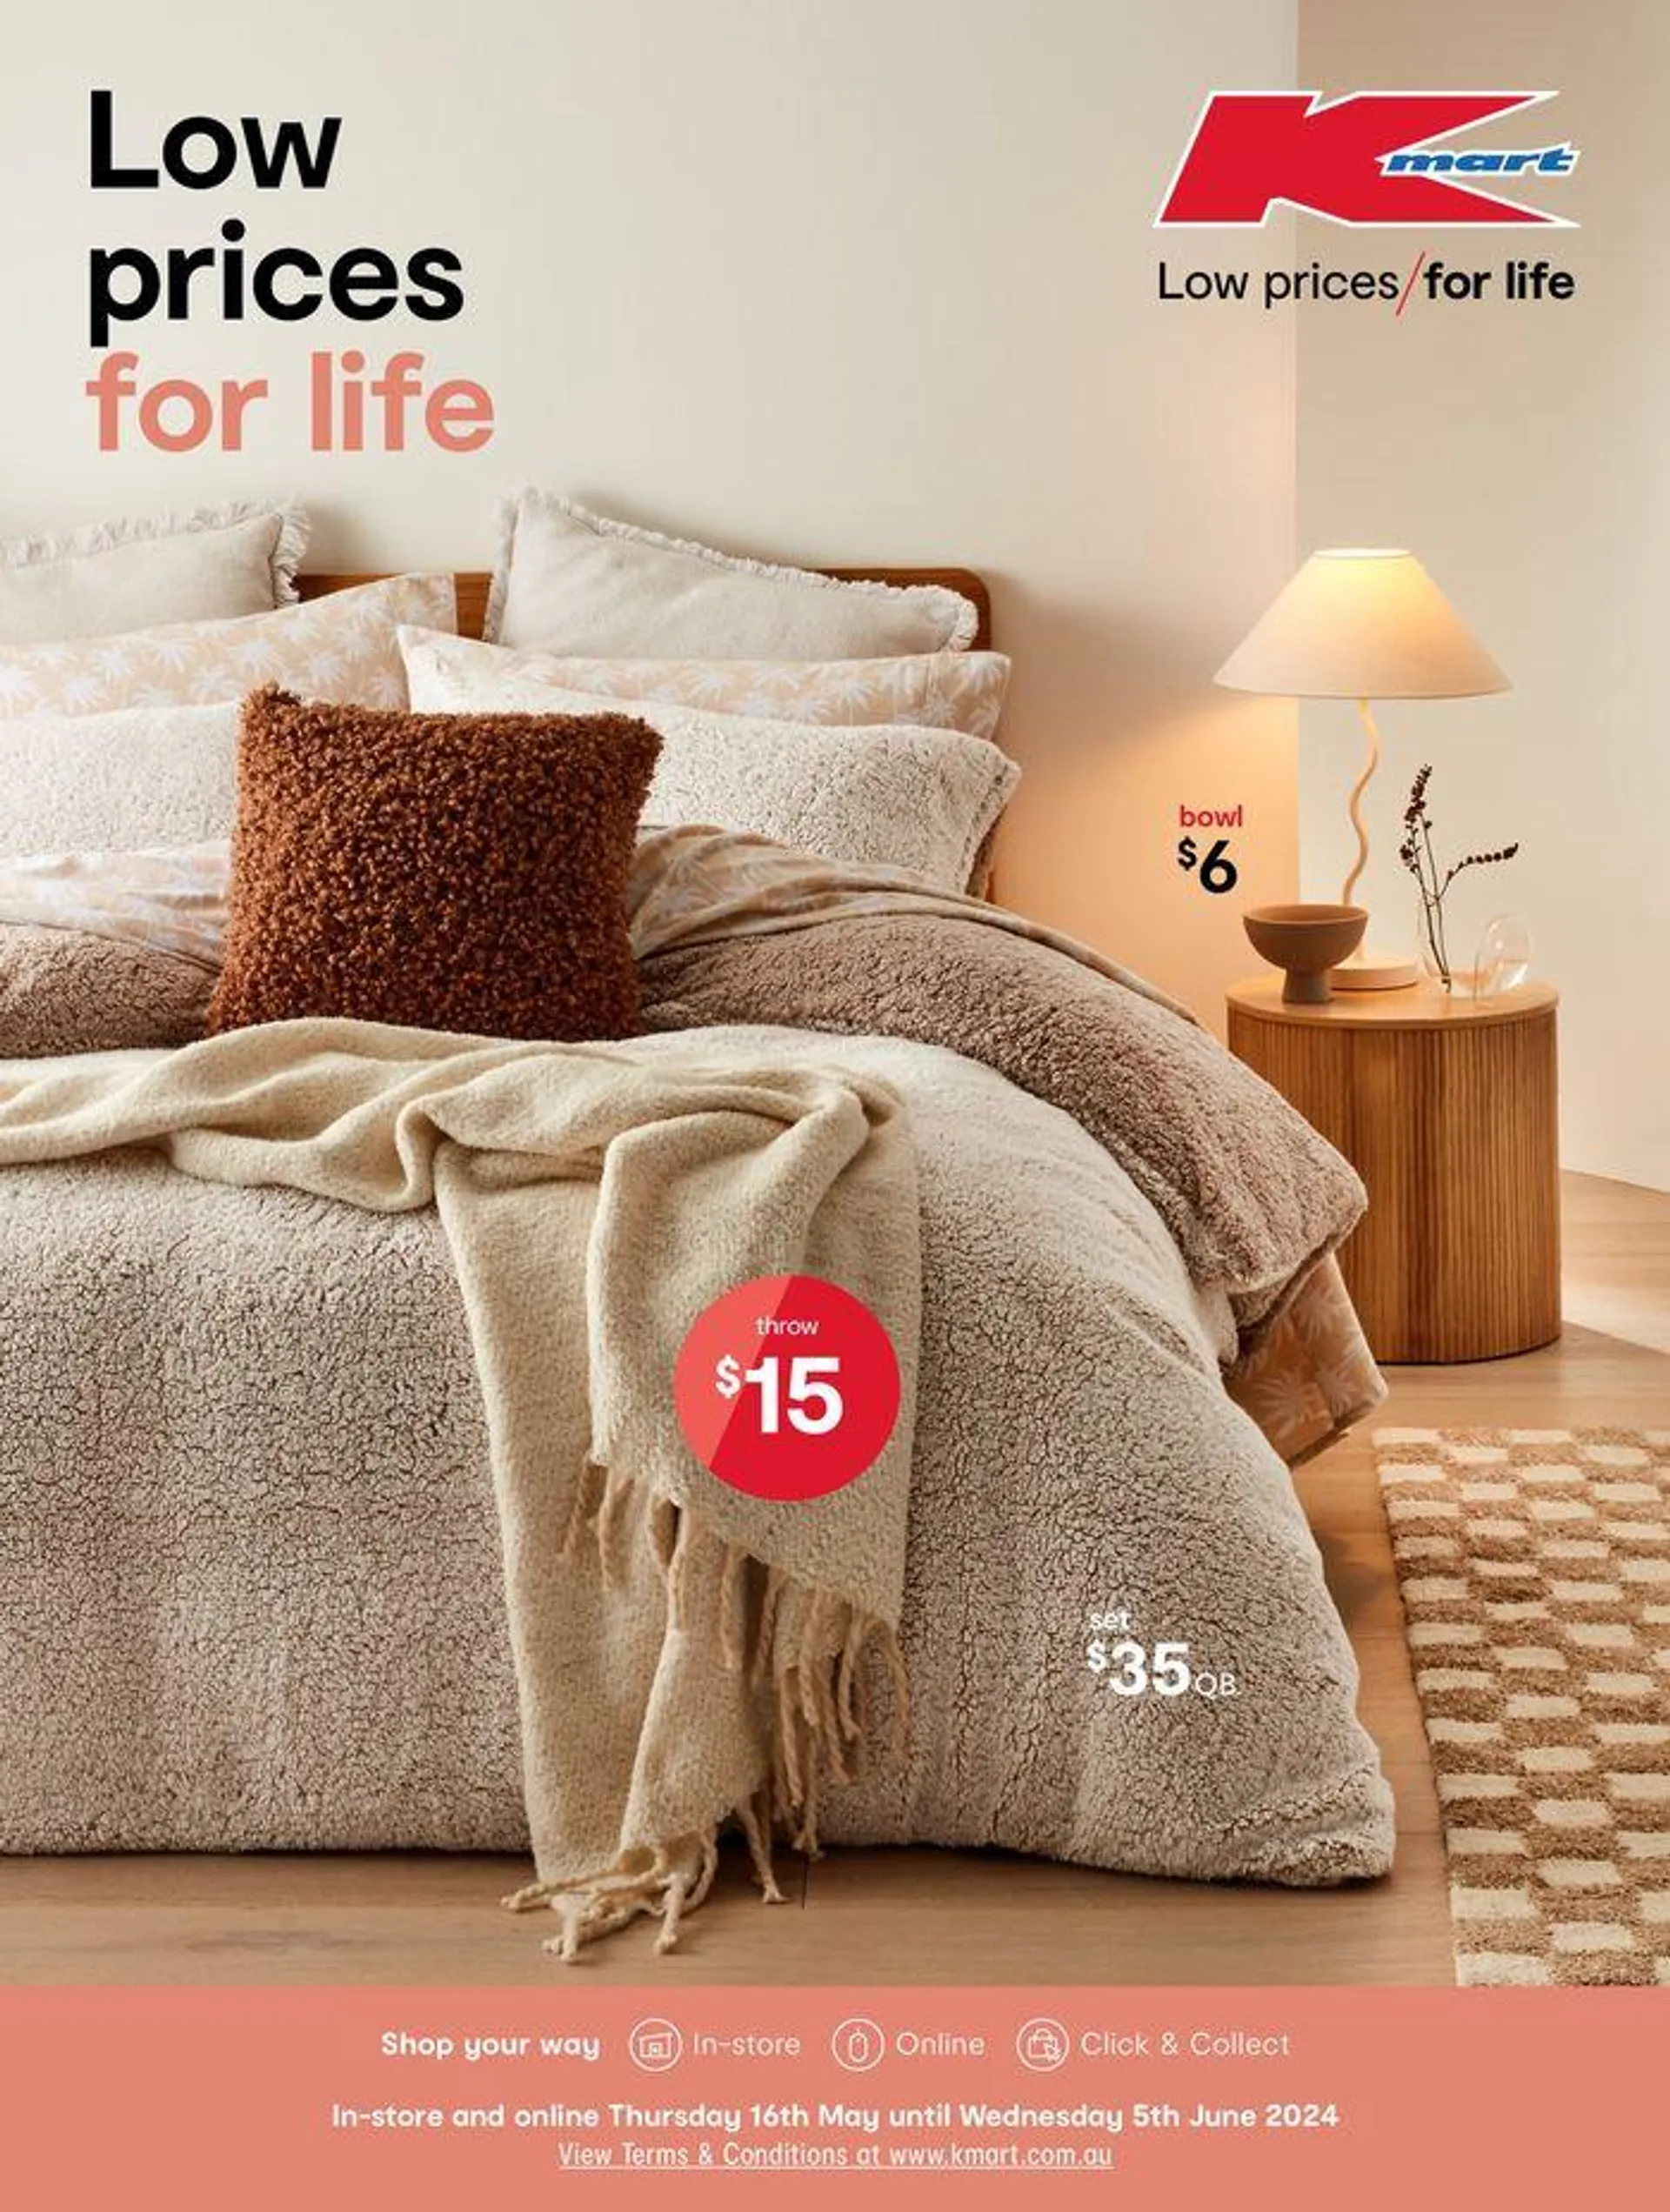 Winter - Low prices for life - 2